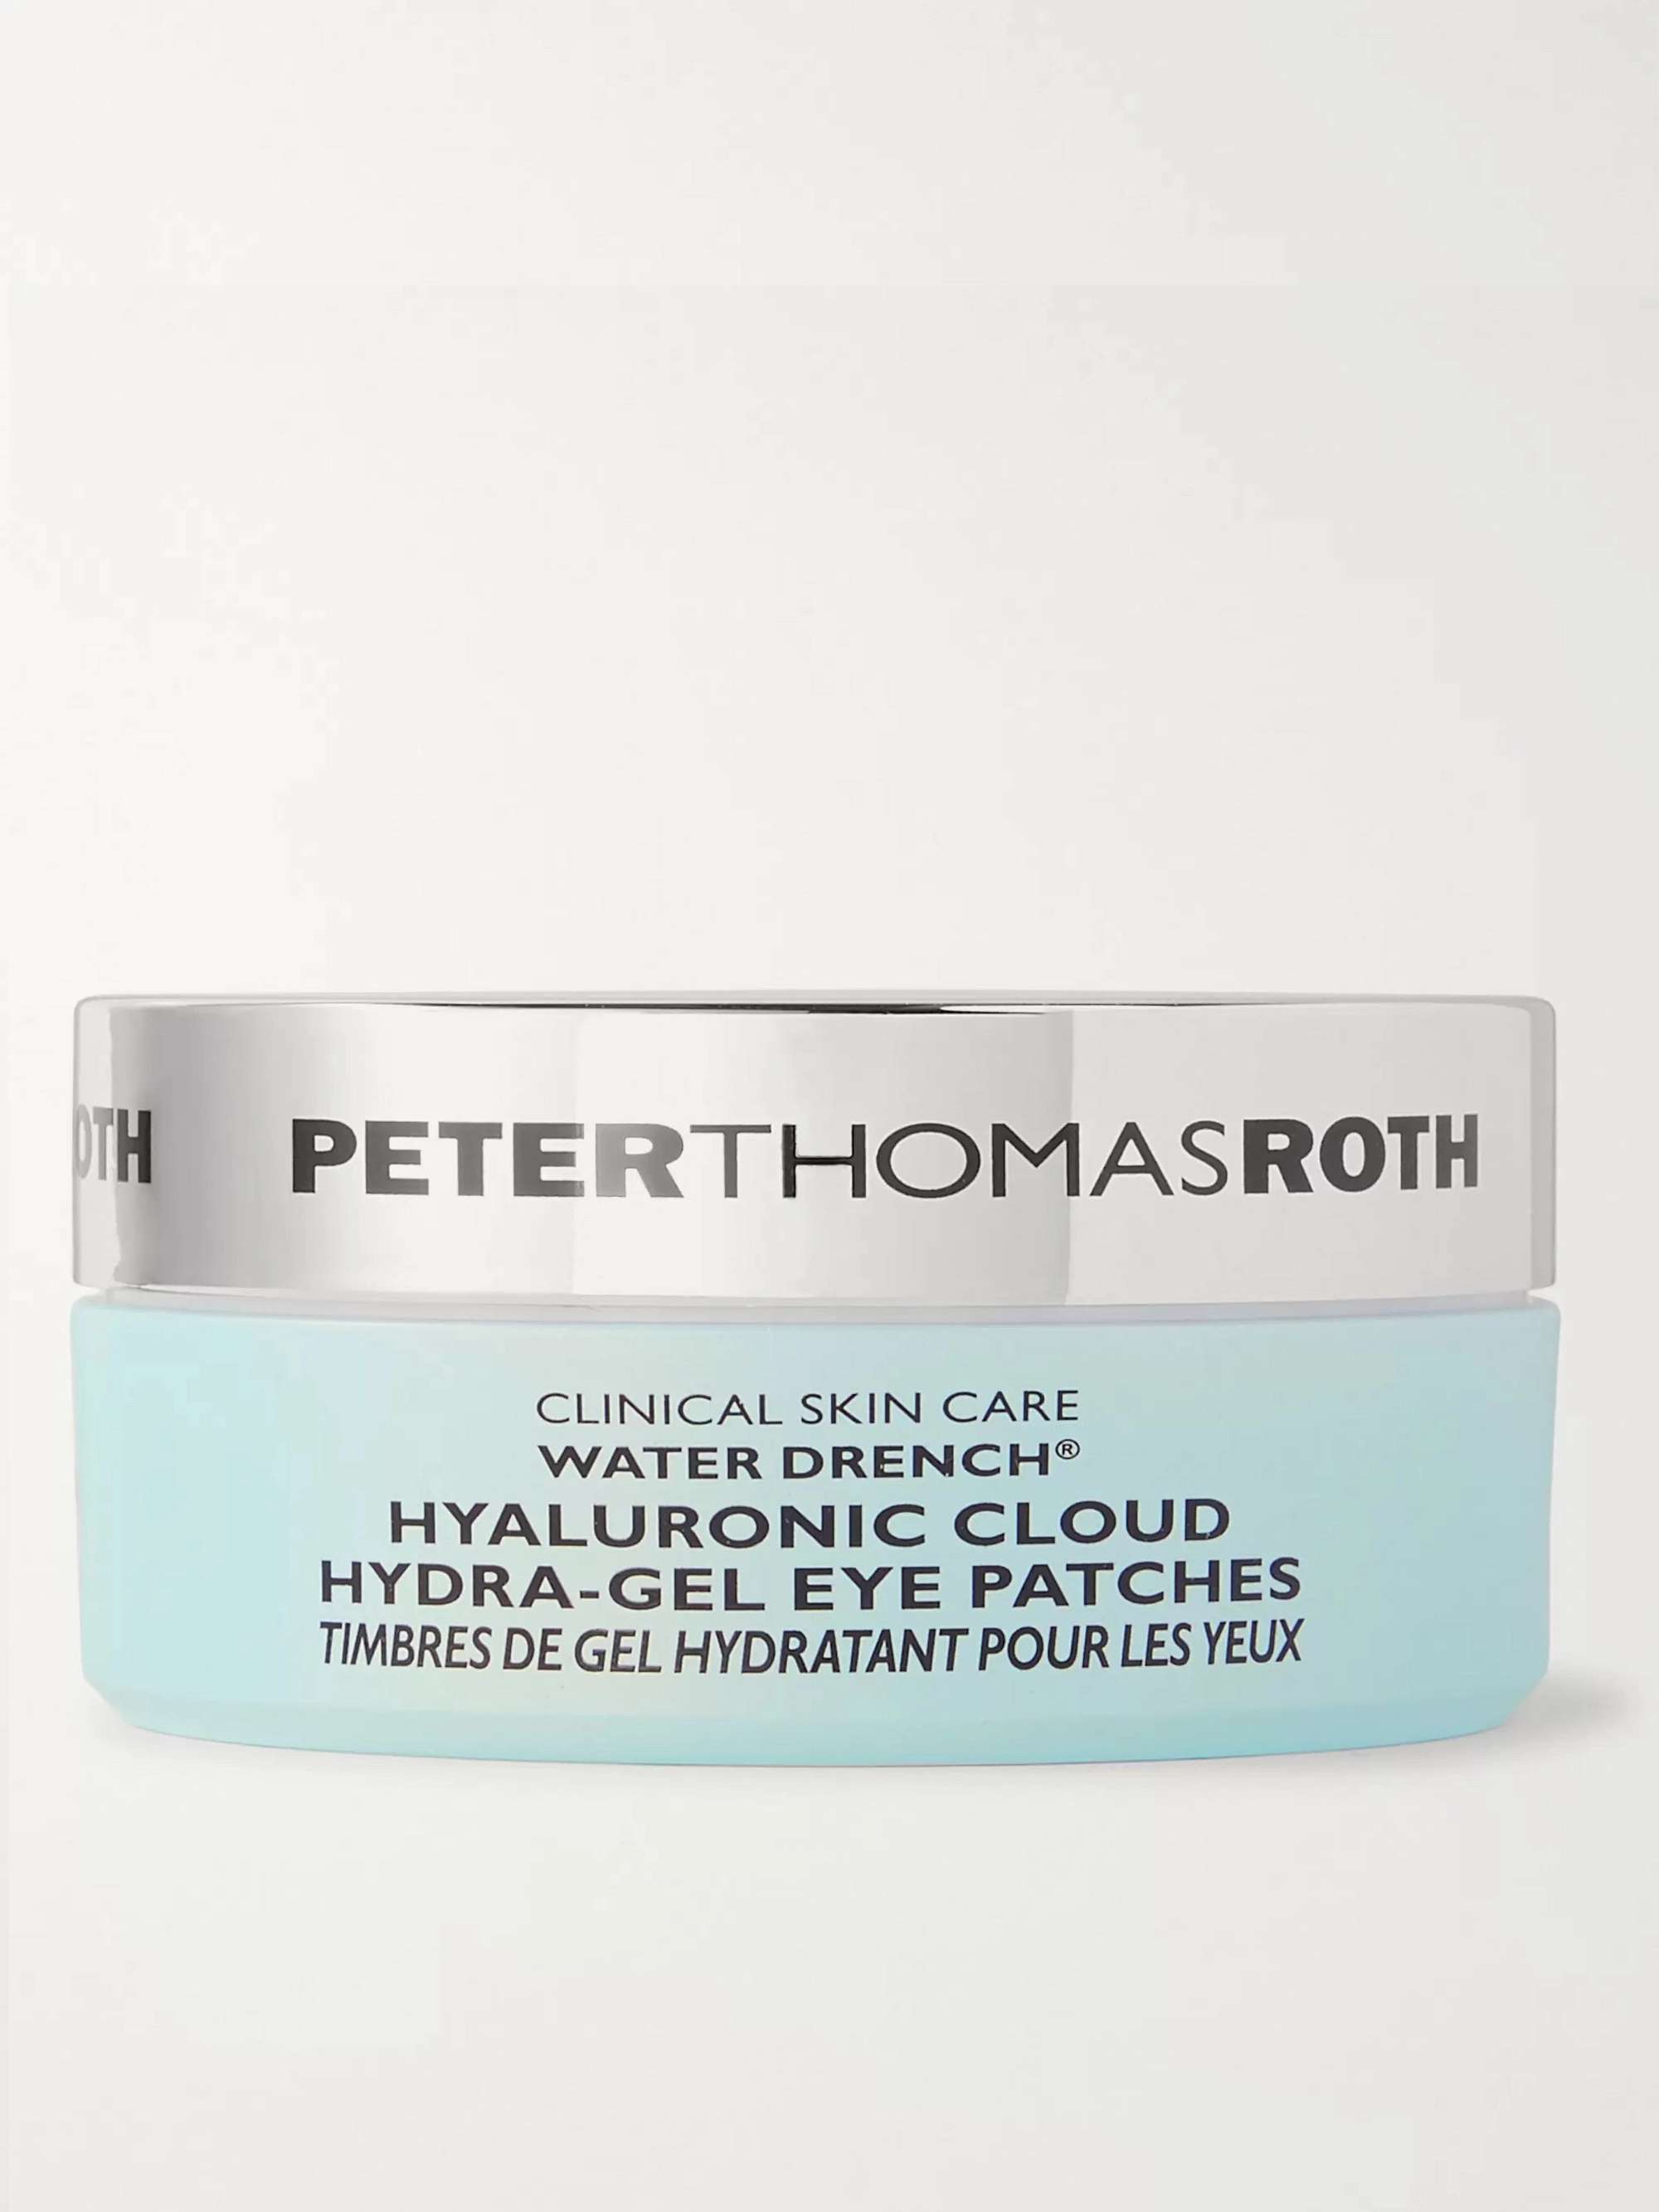 PETER THOMAS ROTH Water Drench Hyaluronic Cloud Hydra-Gel Eye Patches x 30